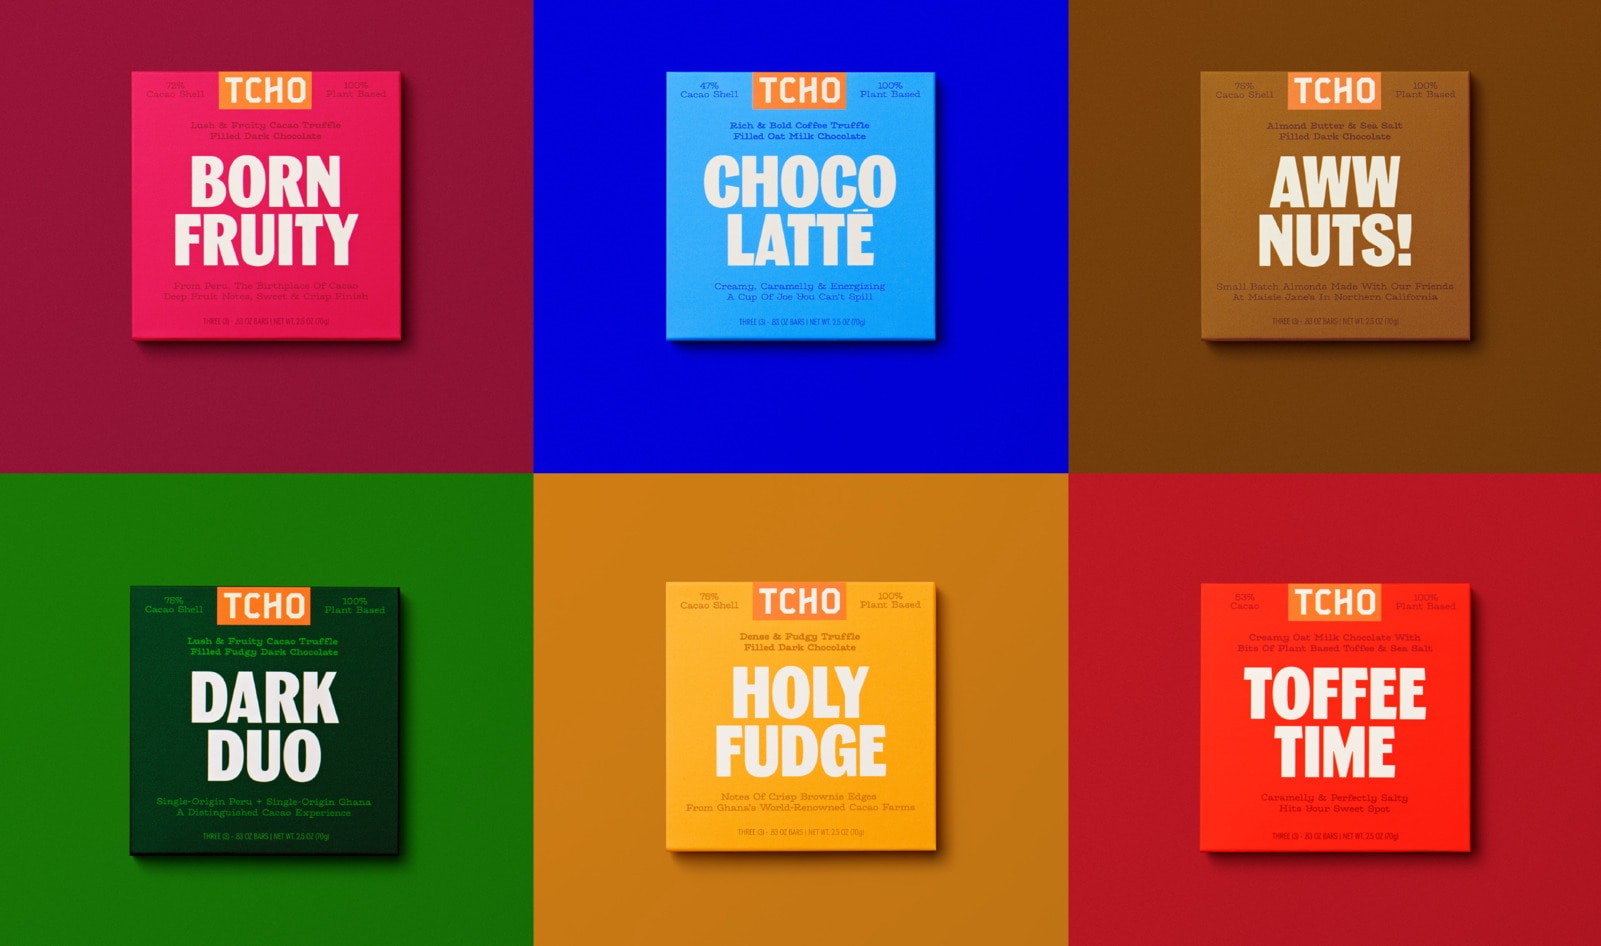 Why TCHO Is About to Become a Vegan Chocolate Company | VegNews